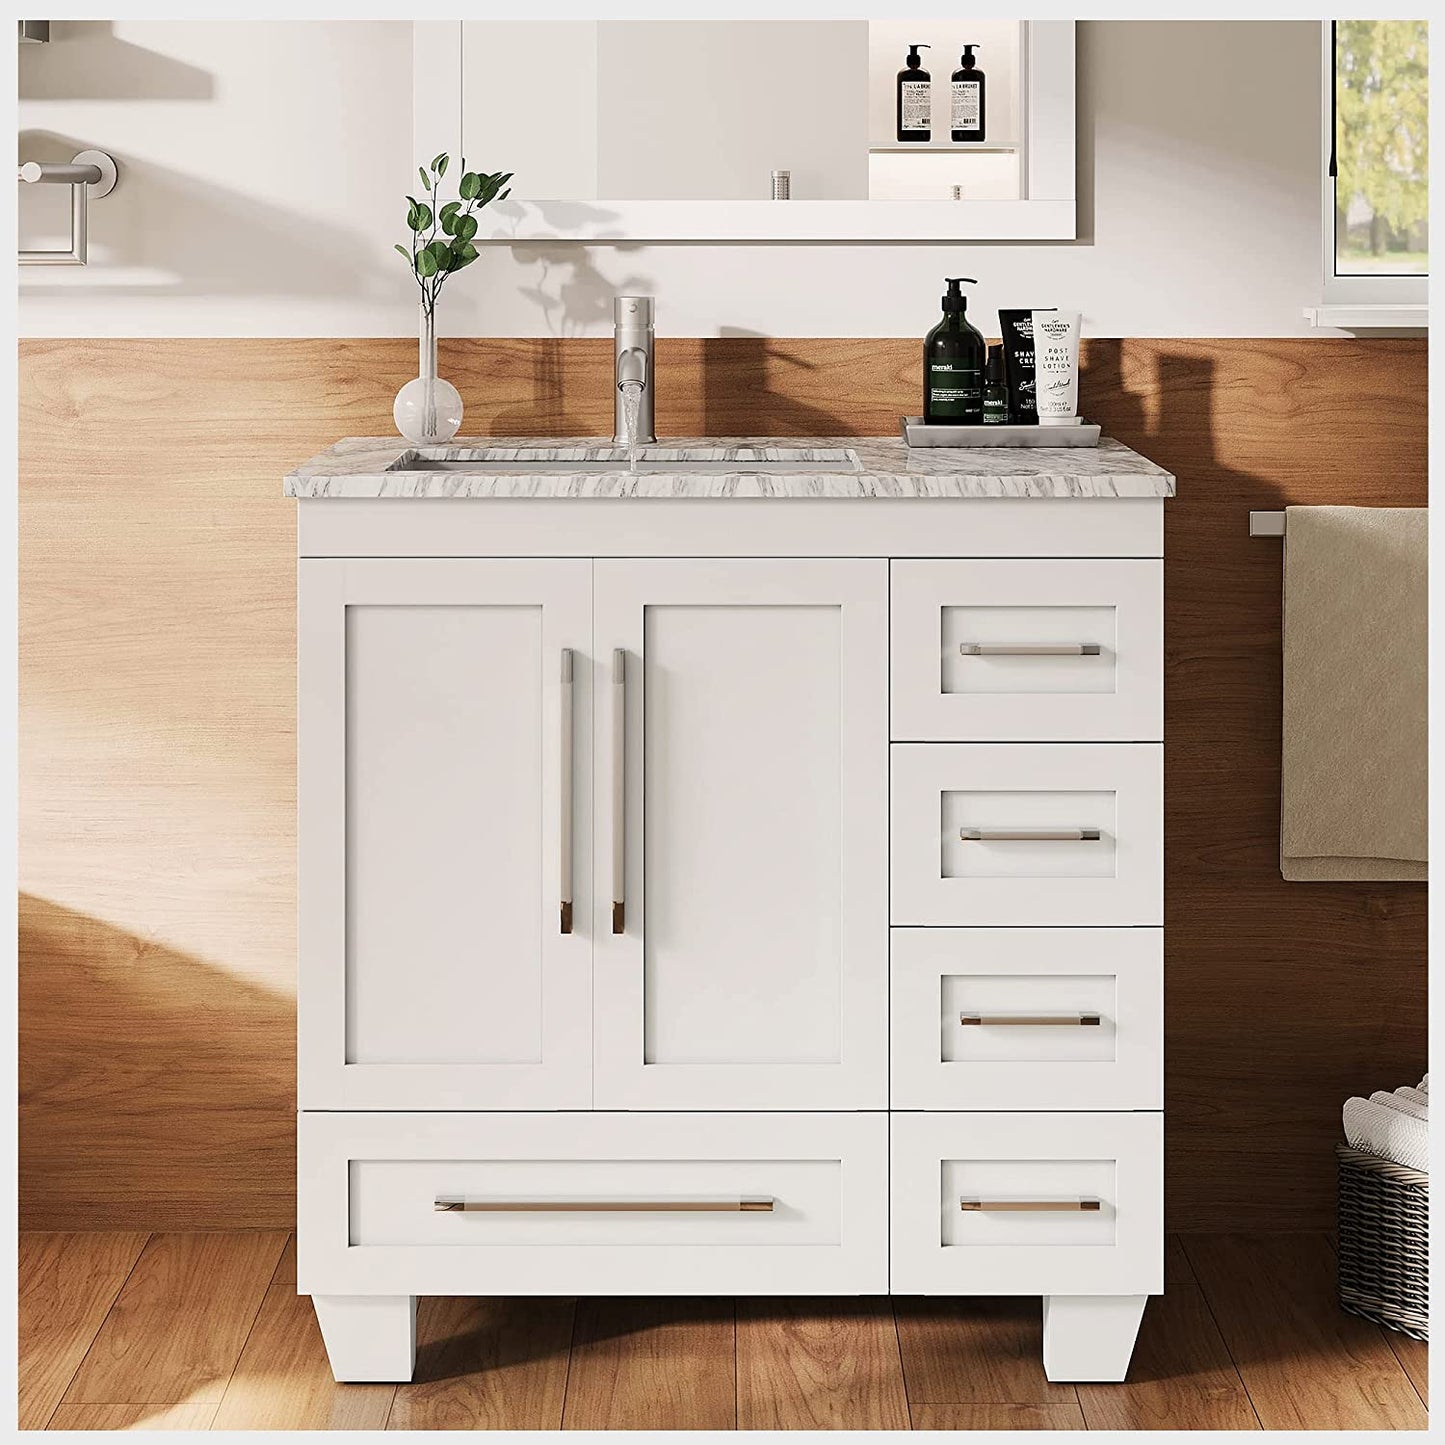 Eviva Loon 30" White Transitional Bathroom Vanity with White Carrara Marble Countertop & Long Handles